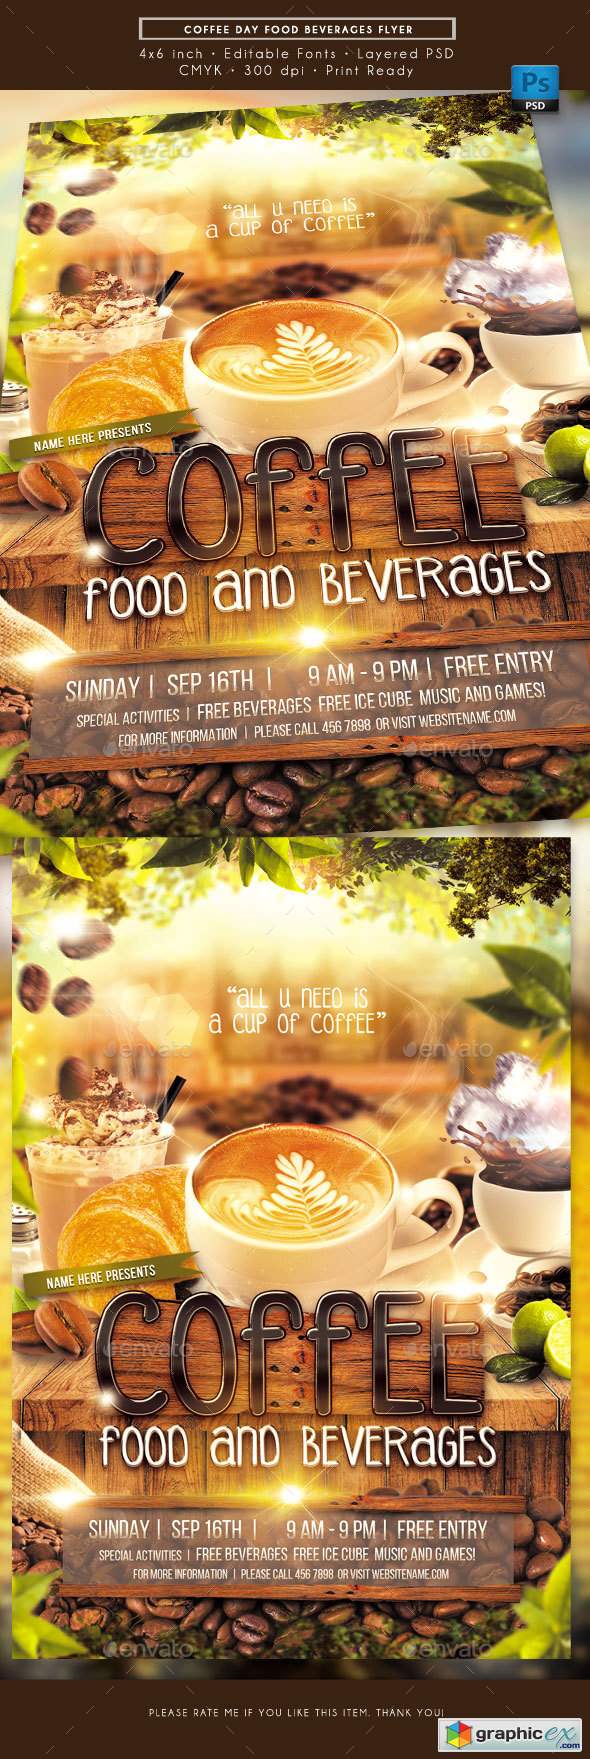 Coffee Day Food Beverages Flyer